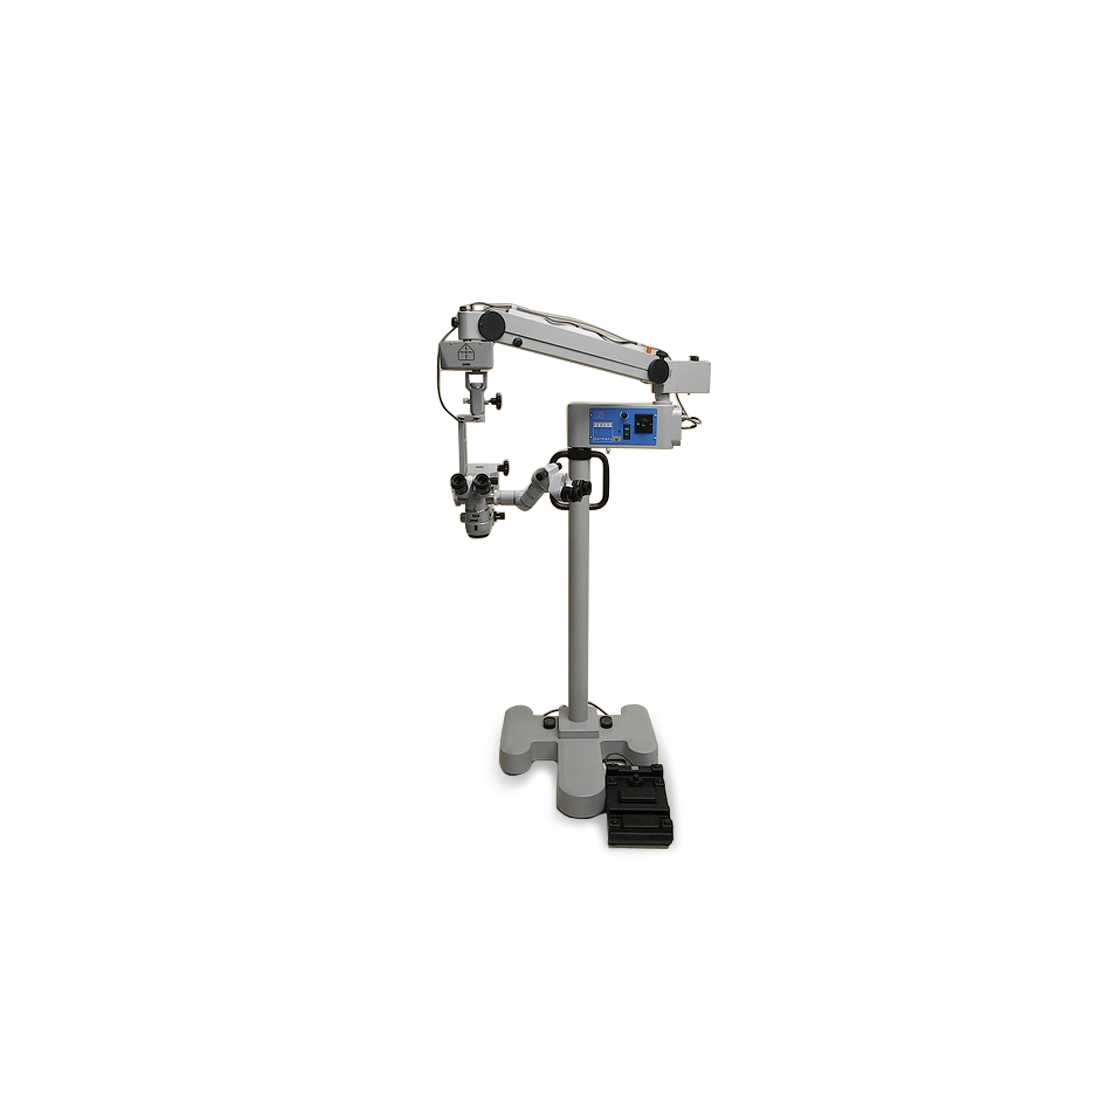 Zeiss OPMI MDU Surgical Microscope